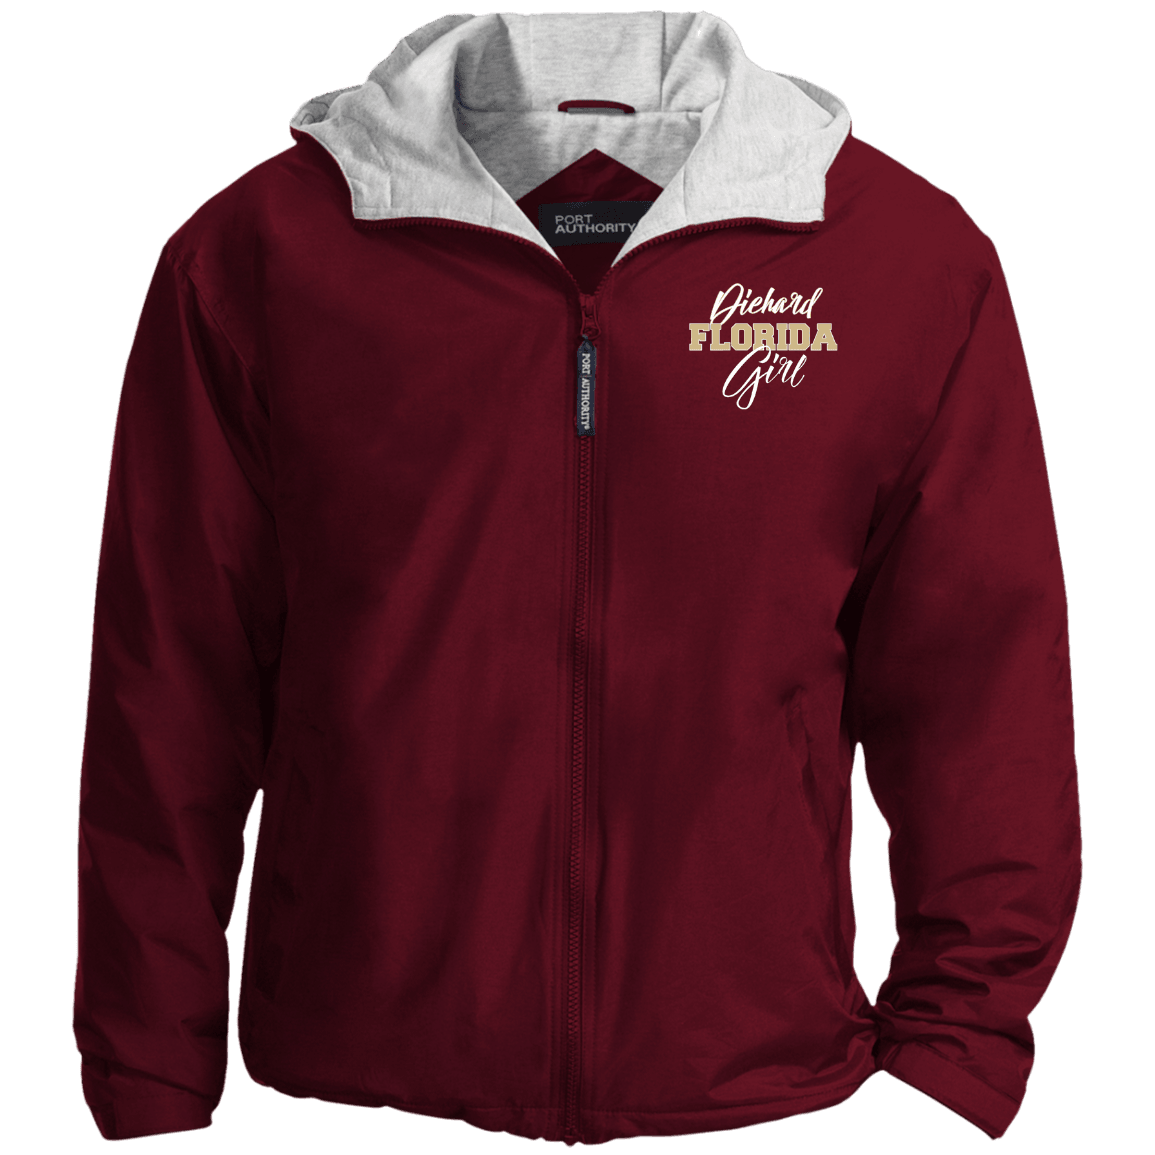 Designs by MyUtopia Shout Out:Diehard Florida Girl Embroidered Team Jacket Garnet,Maroon/Light Oxford / X-Small,Jackets